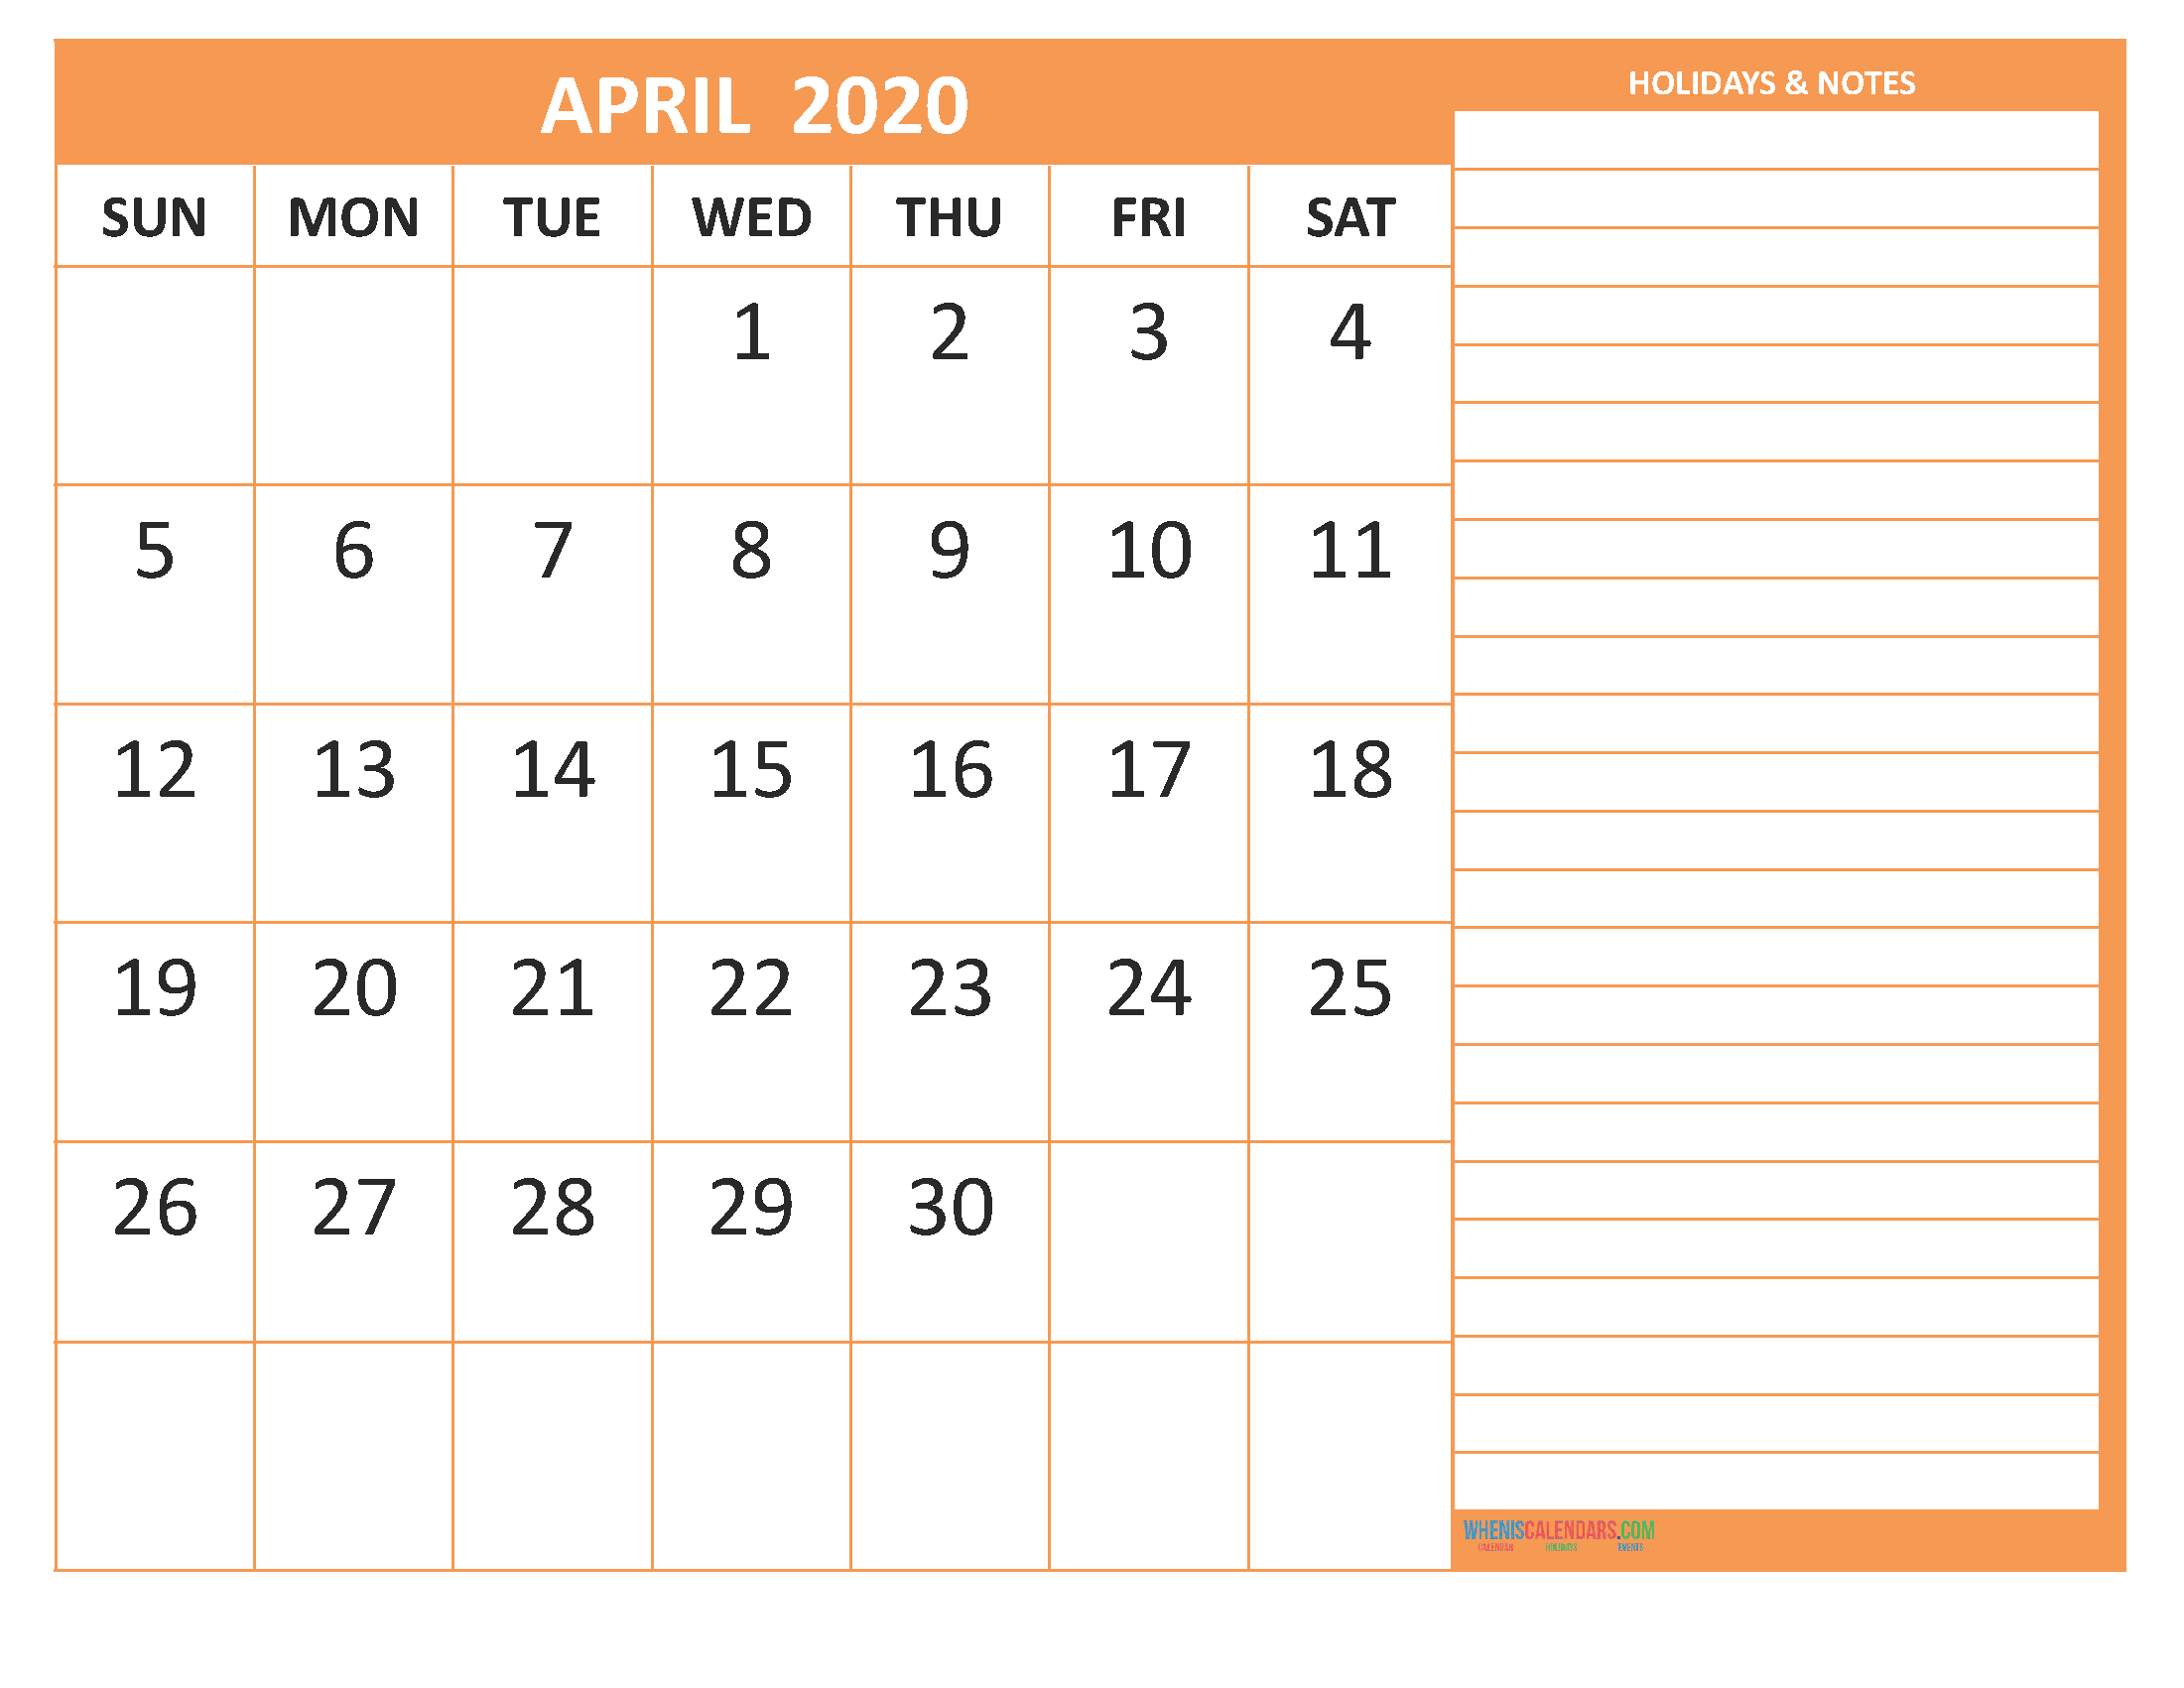 Free Printable Monthly Calendar 2020 January with Holidays